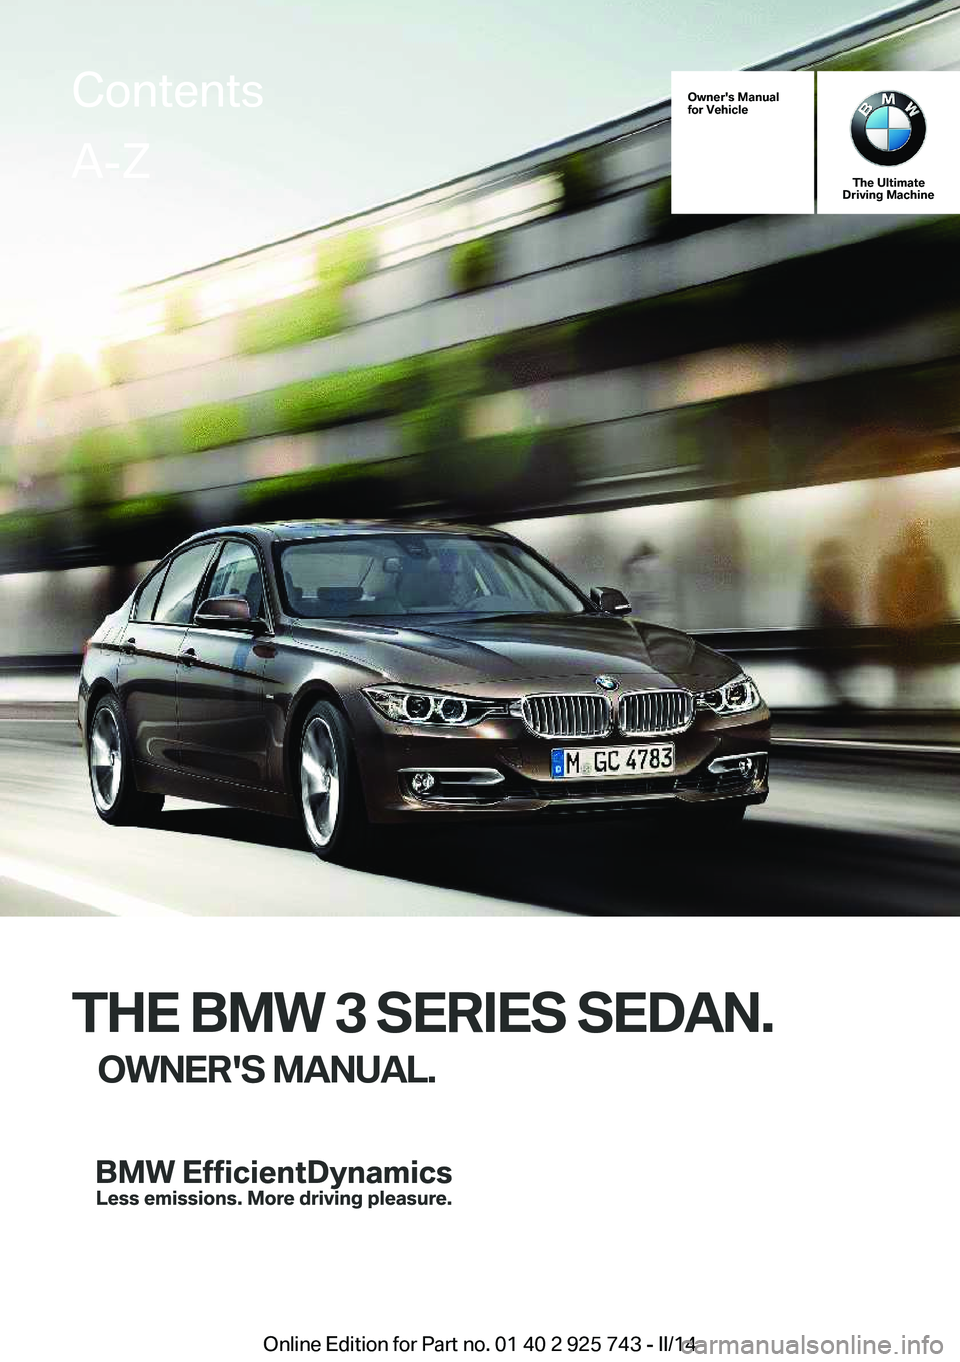 BMW 328D SEDAN 2014  Owners Manual Owner's Manual
for Vehicle
The Ultimate
Driving Machine
THE BMW 3 SERIES SEDAN.
OWNER'S MANUAL.
ContentsA-Z
Online Edition for Part no. 01 40 2 925 743 - II/14   